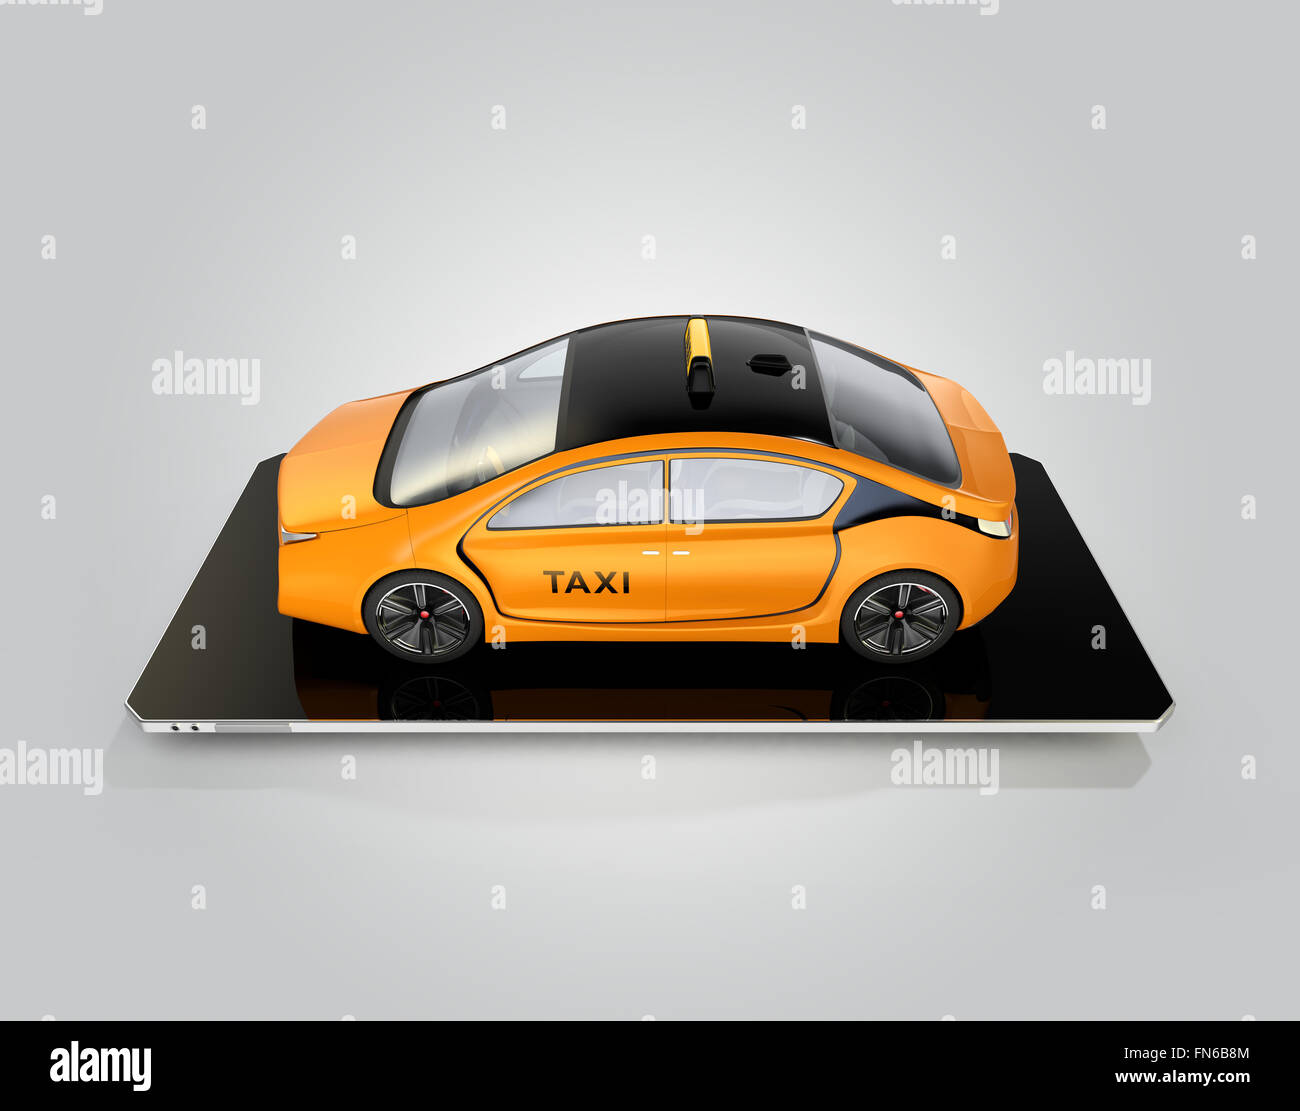 Yellow electric taxi on smart phone. Concept for mobile taxi order service. Stock Photo